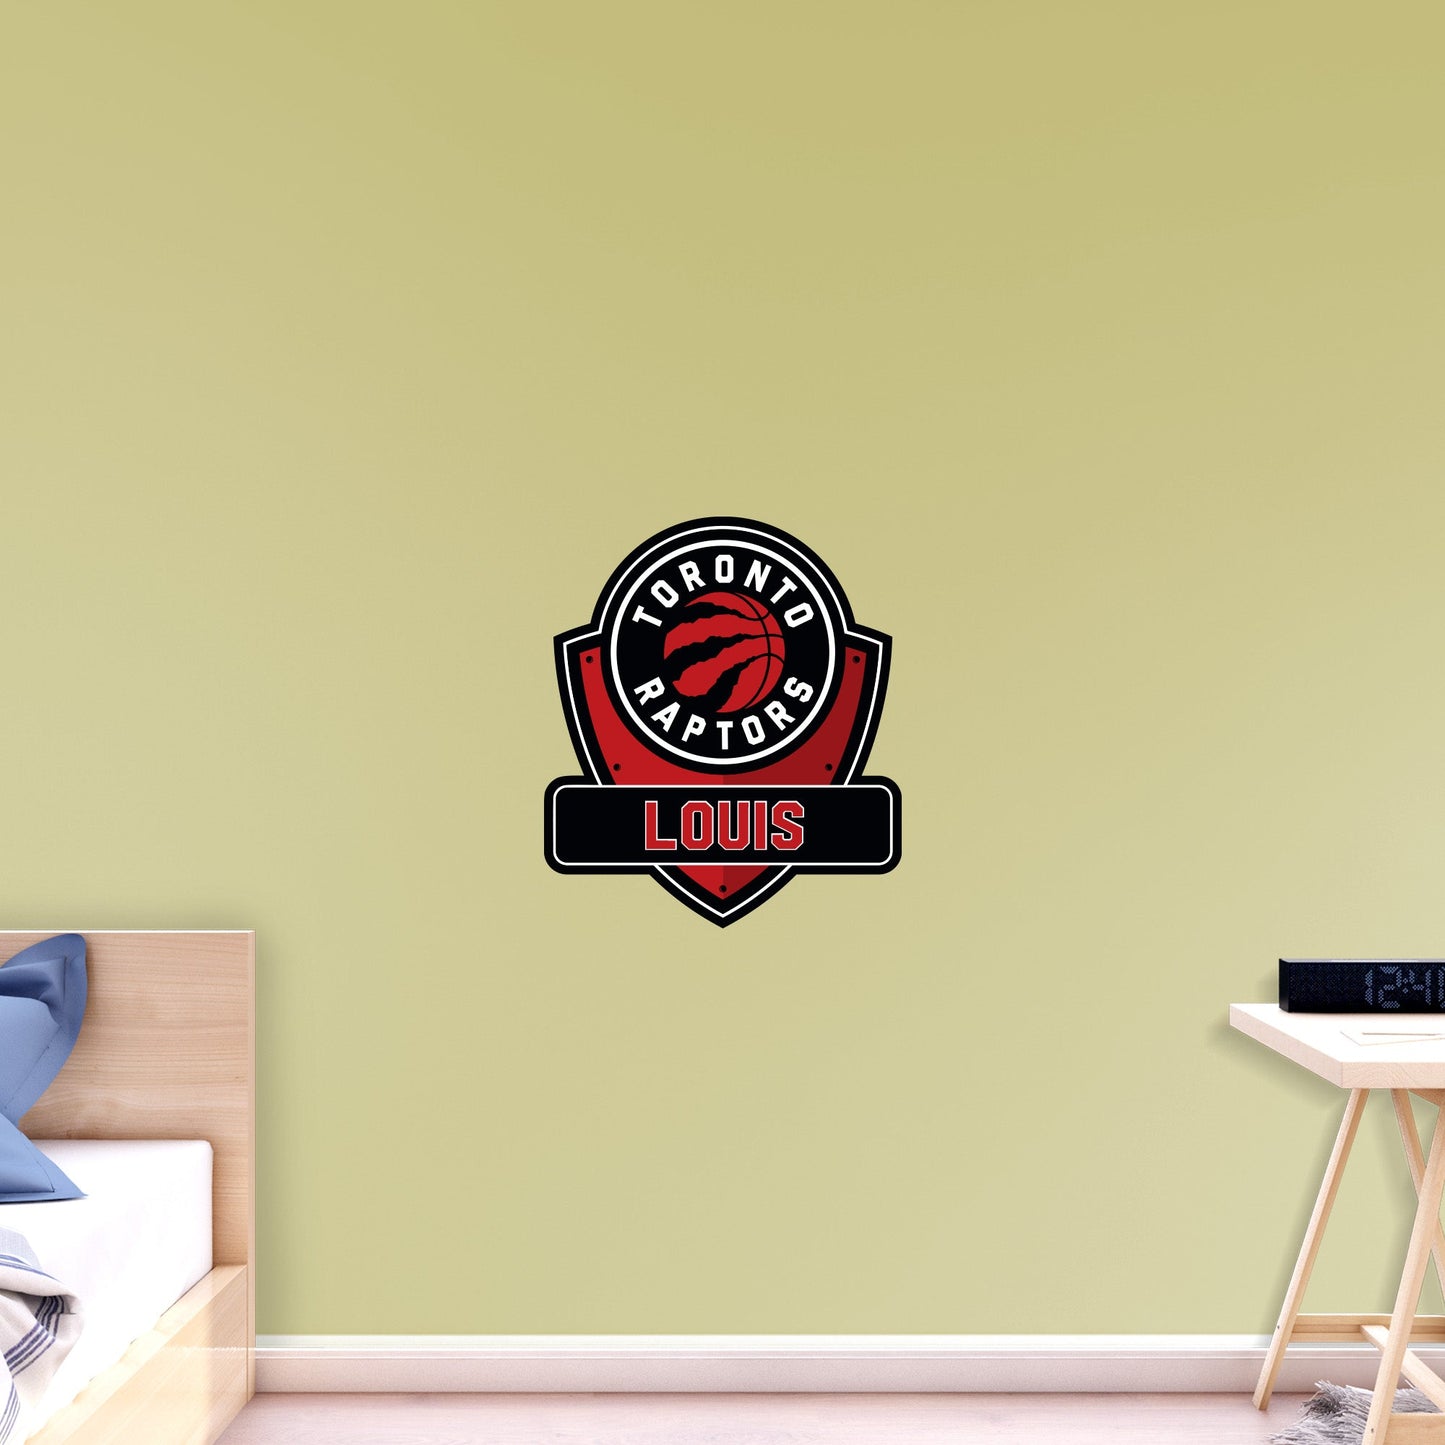 Toronto Raptors: Badge Personalized Name - Officially Licensed NBA Removable Adhesive Decal